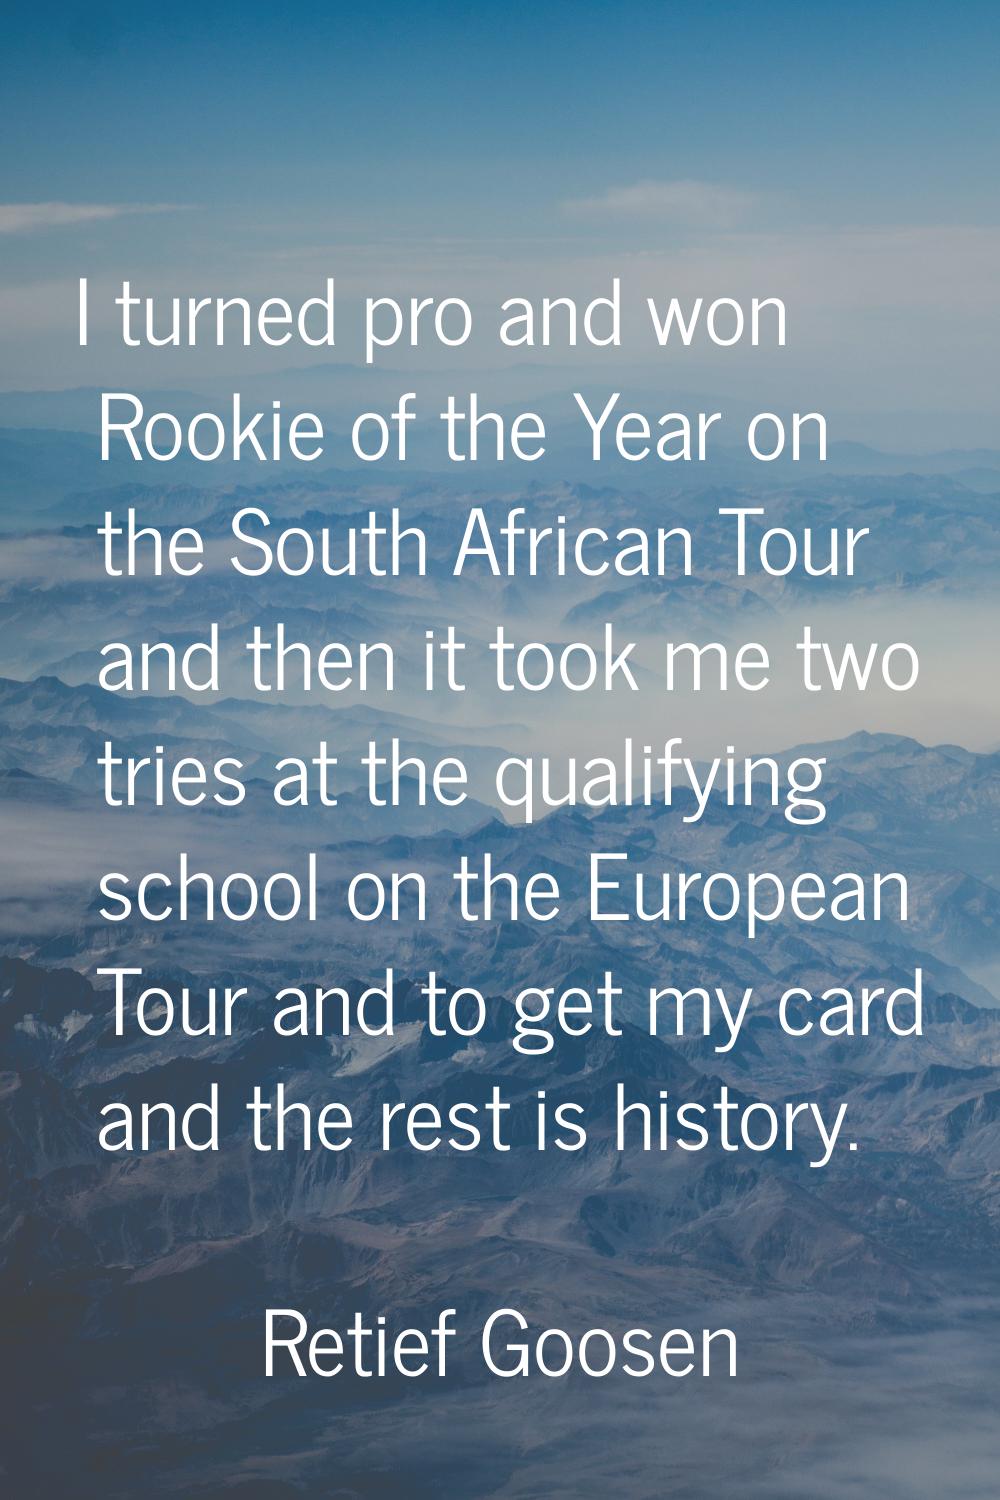 I turned pro and won Rookie of the Year on the South African Tour and then it took me two tries at 